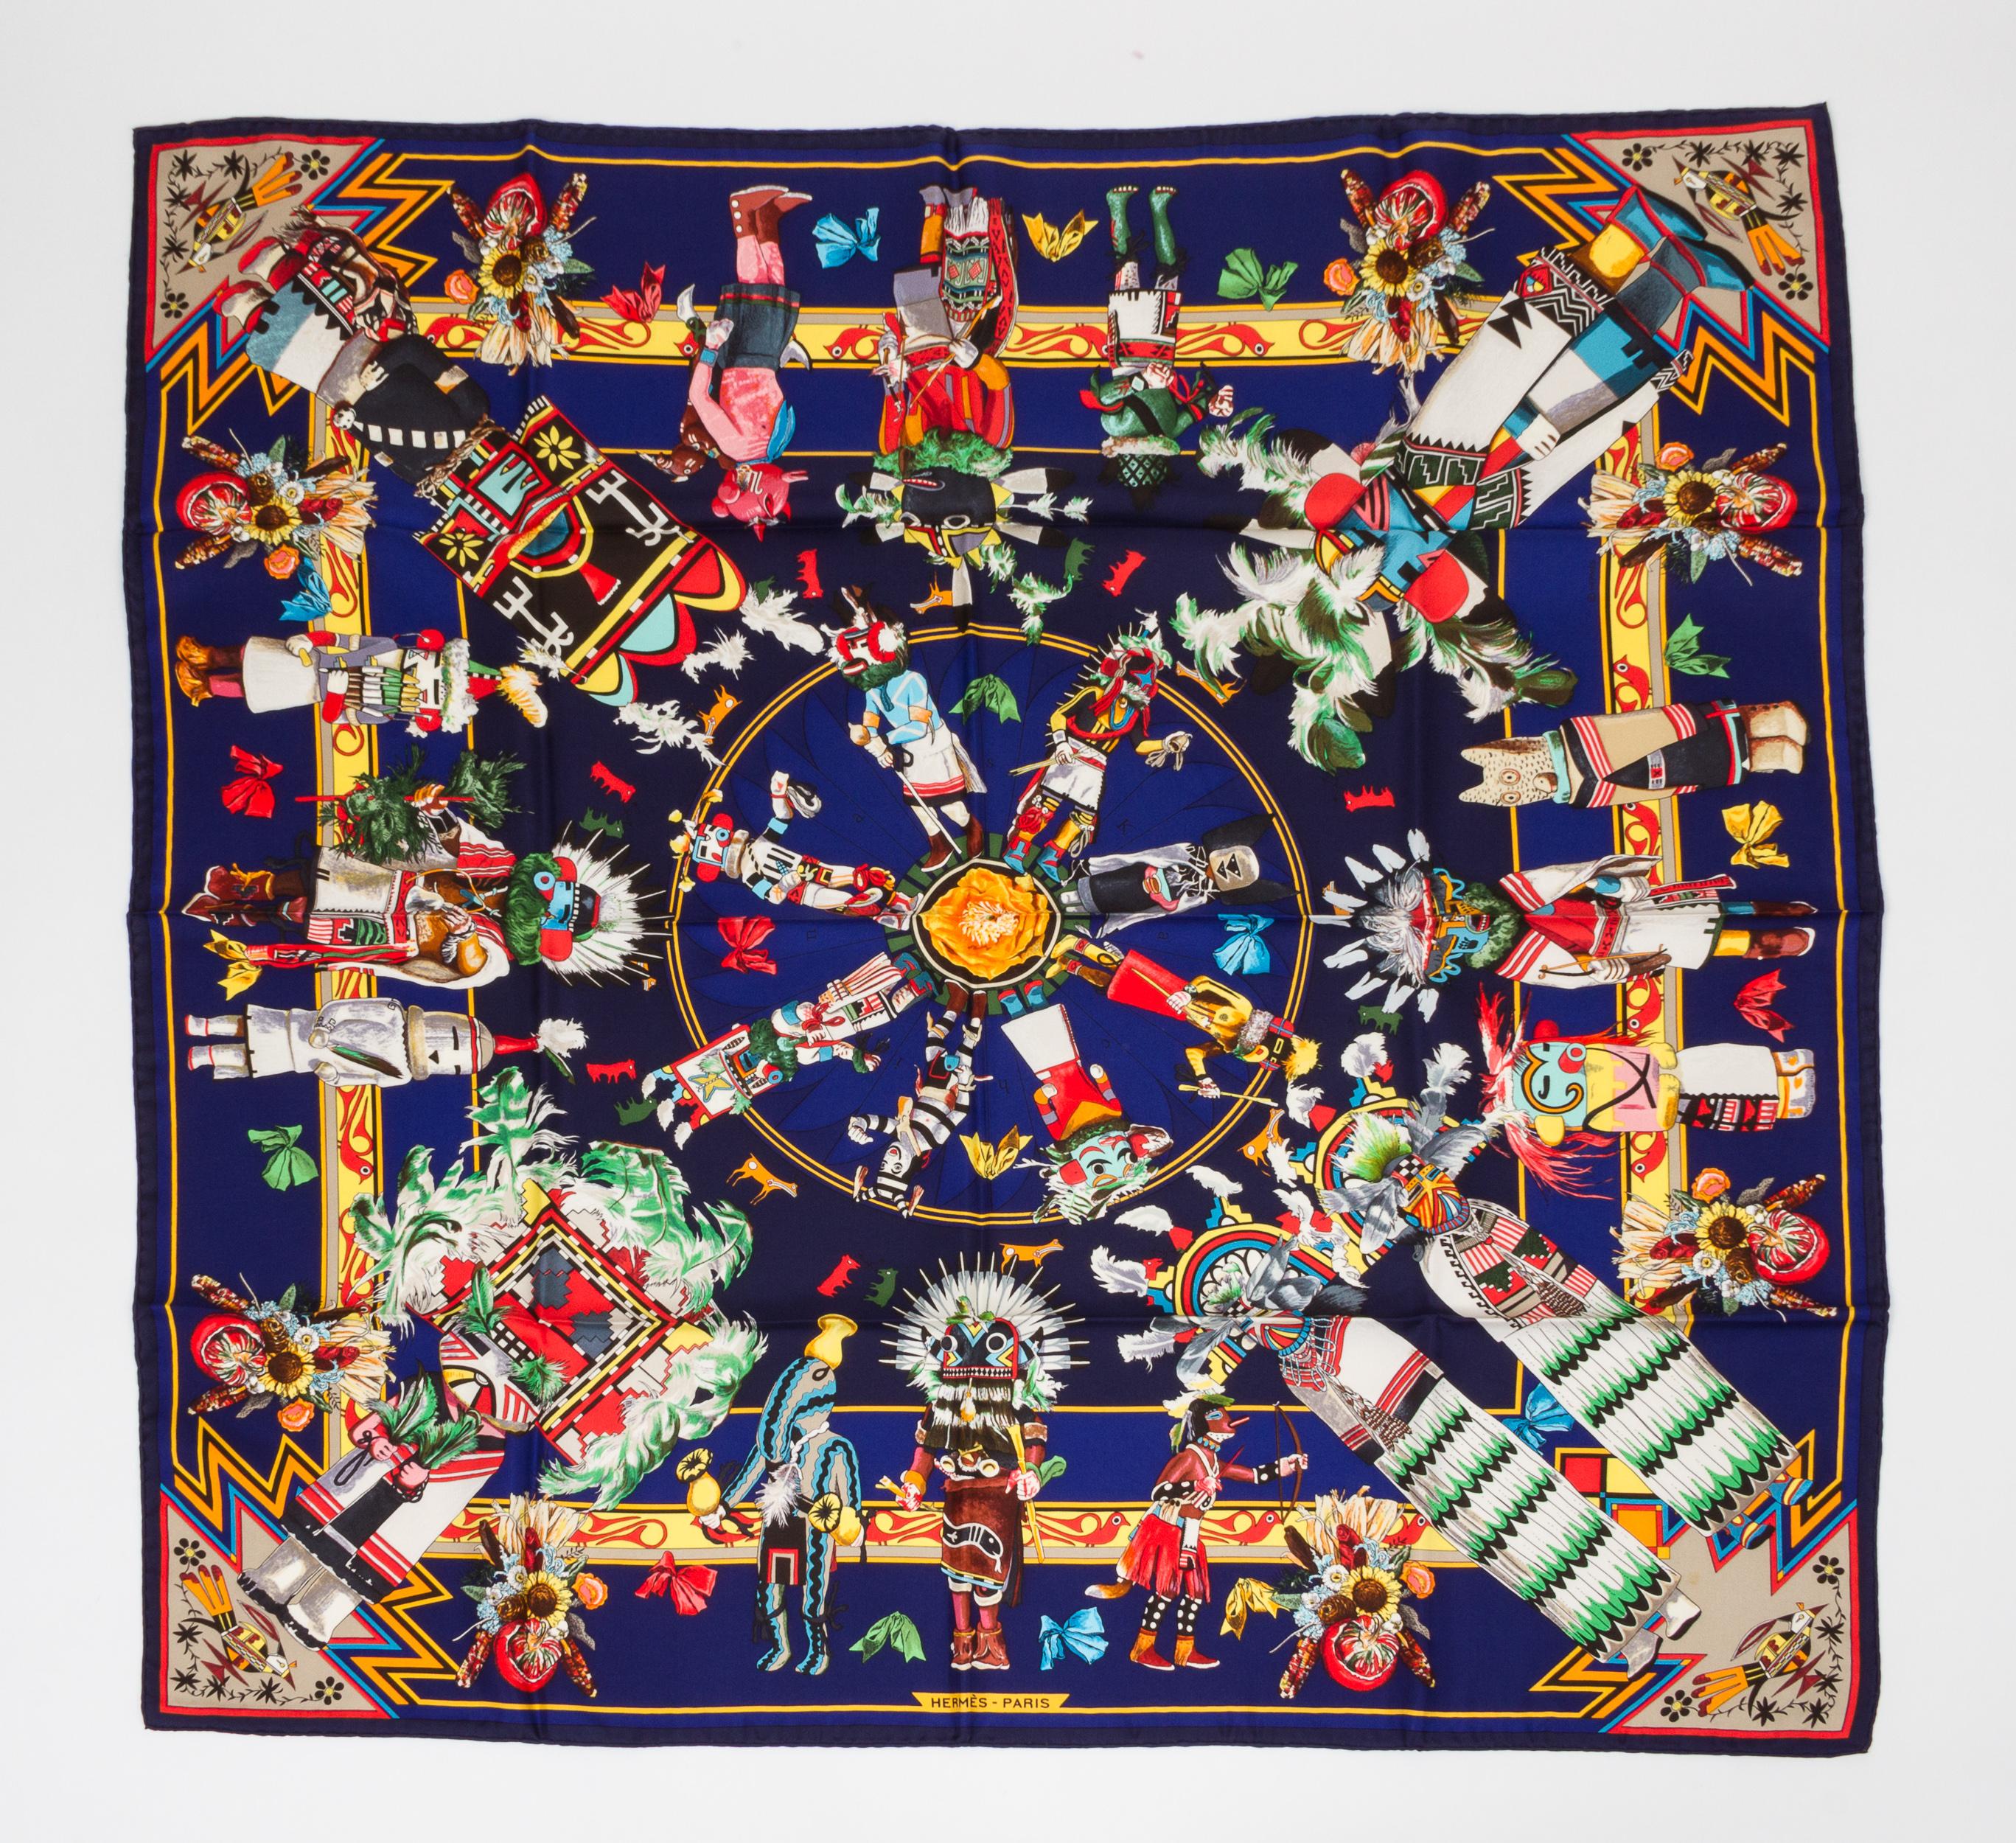 Hermès Kachinas Collectible Blue Silk Twill Kermit Oliver Scarf in Box In Excellent Condition For Sale In West Hollywood, CA